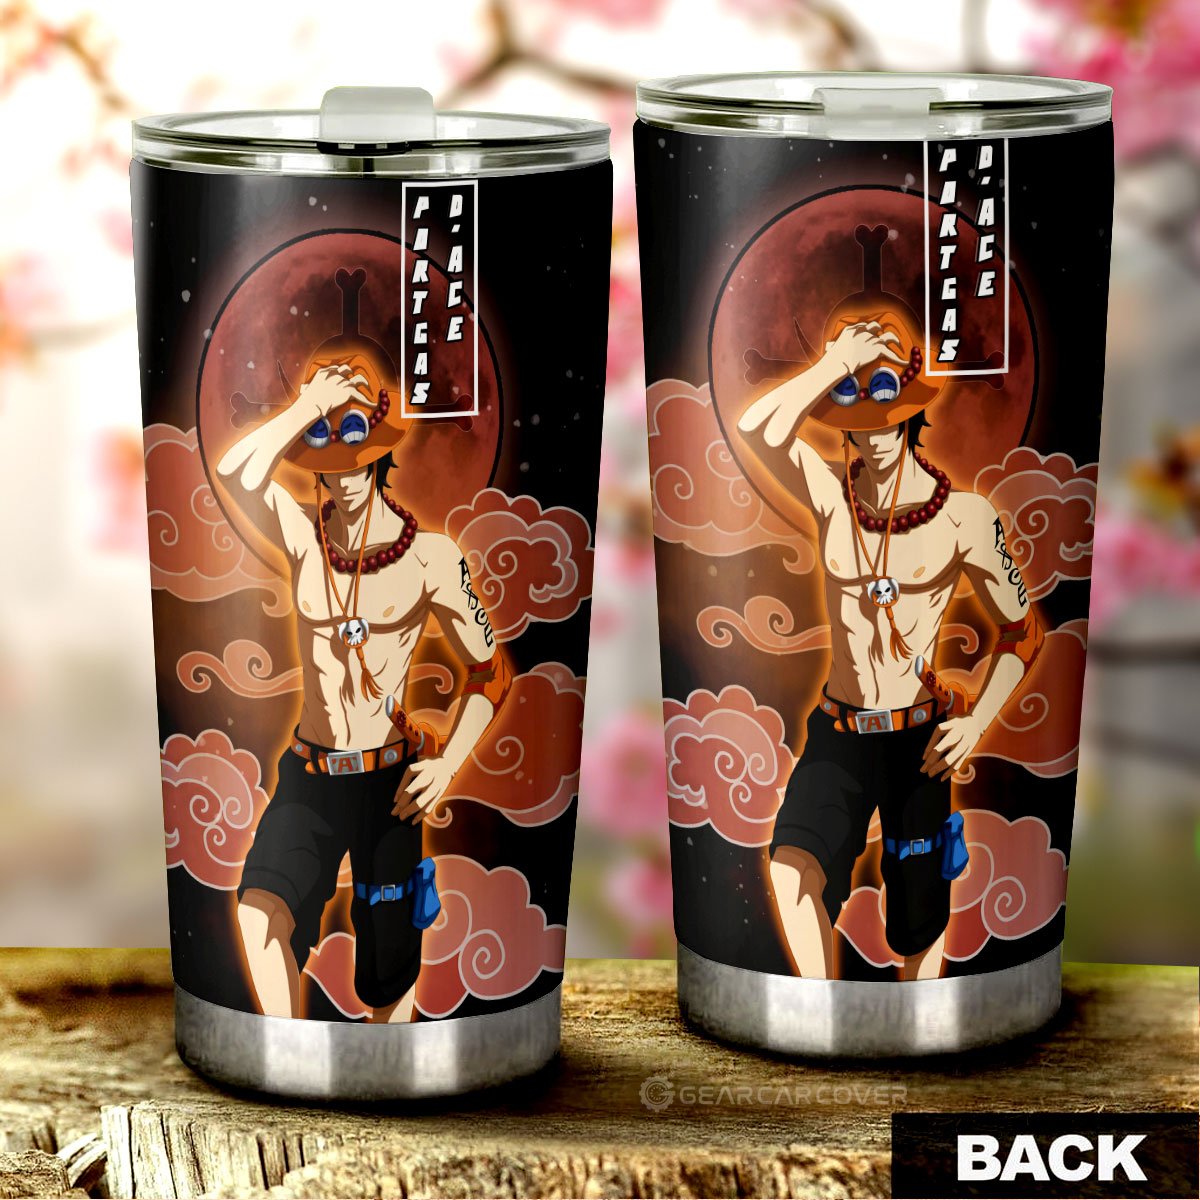 Portgas D. Ace Tumbler Cup Custom One Piece Anime Car Accessories For Anime Fans - Gearcarcover - 3